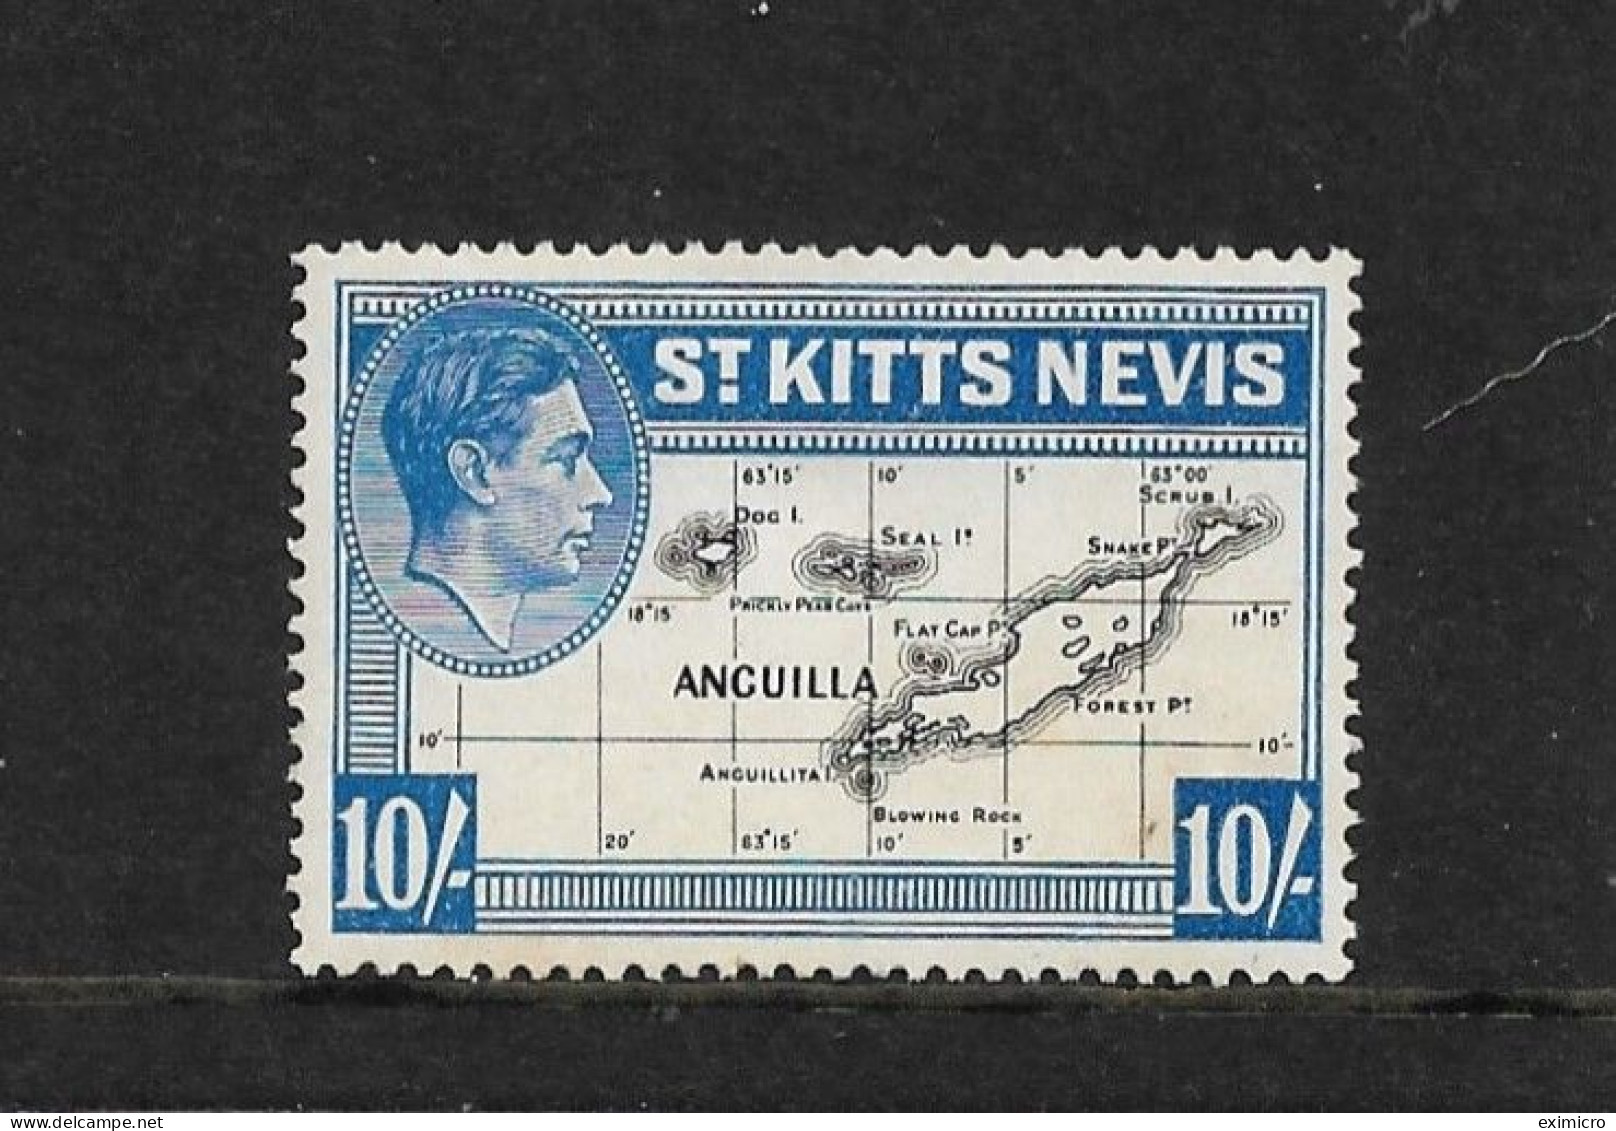 ST KITTS-NEVIS 1948 10s MAP SG 77e MOUNTED MINT Cat £18 - St.Christopher-Nevis & Anguilla (...-1980)